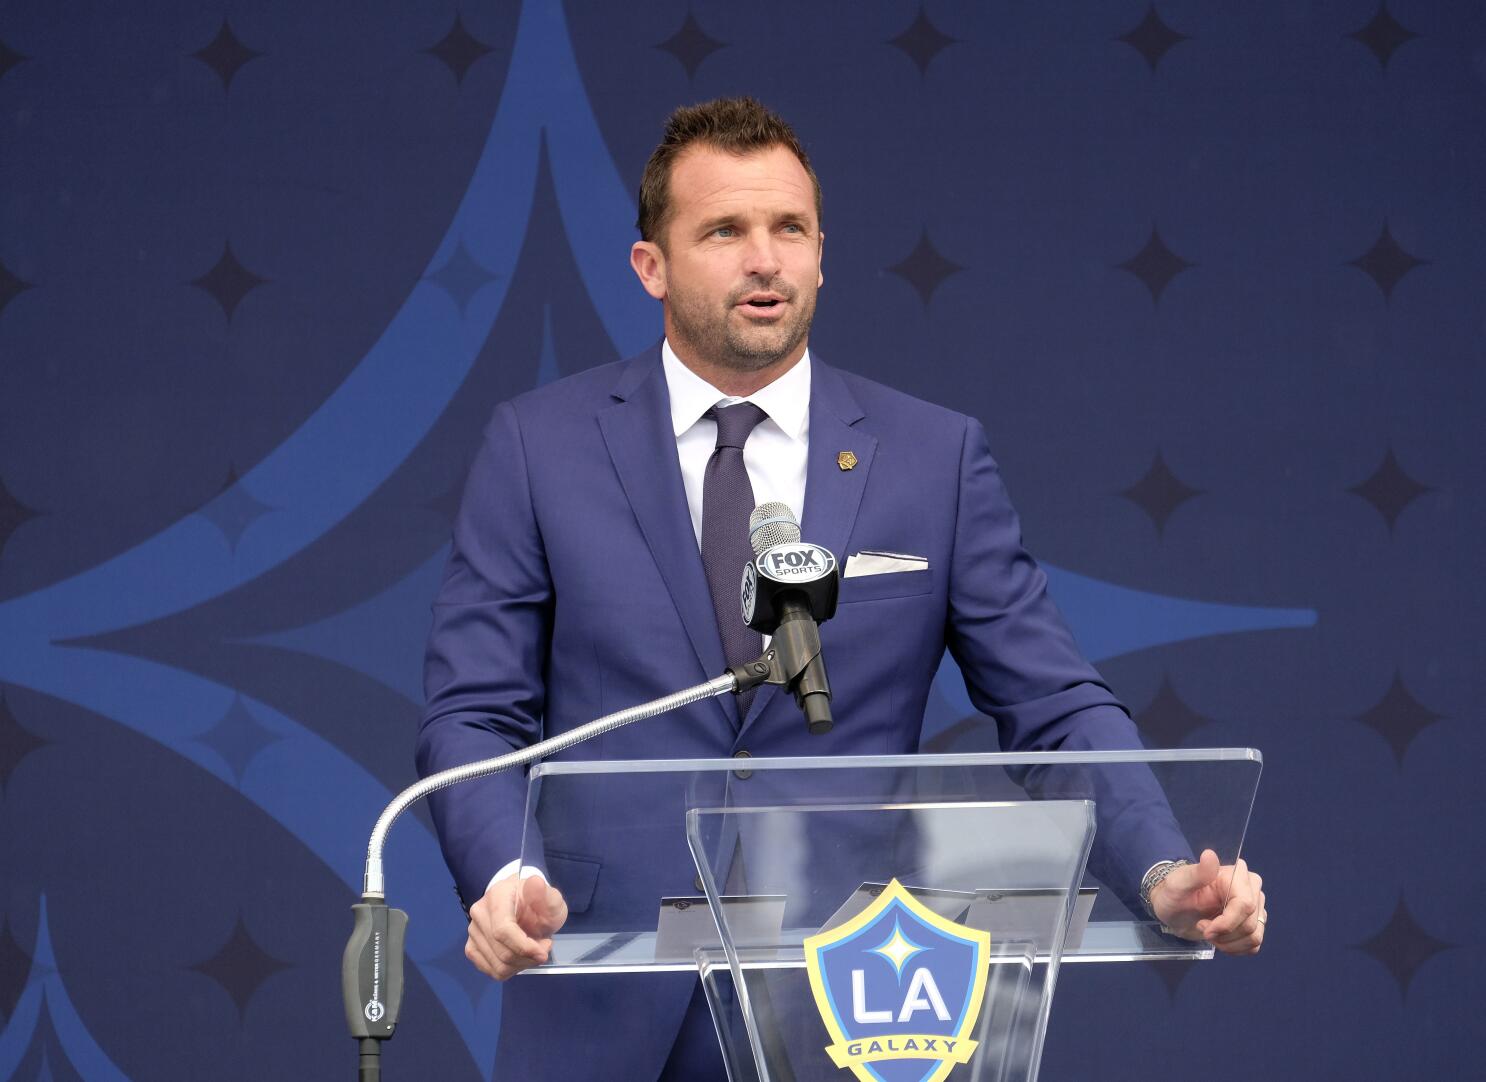 LA Galaxy President Chris Klein Shares The Inside Story Of The